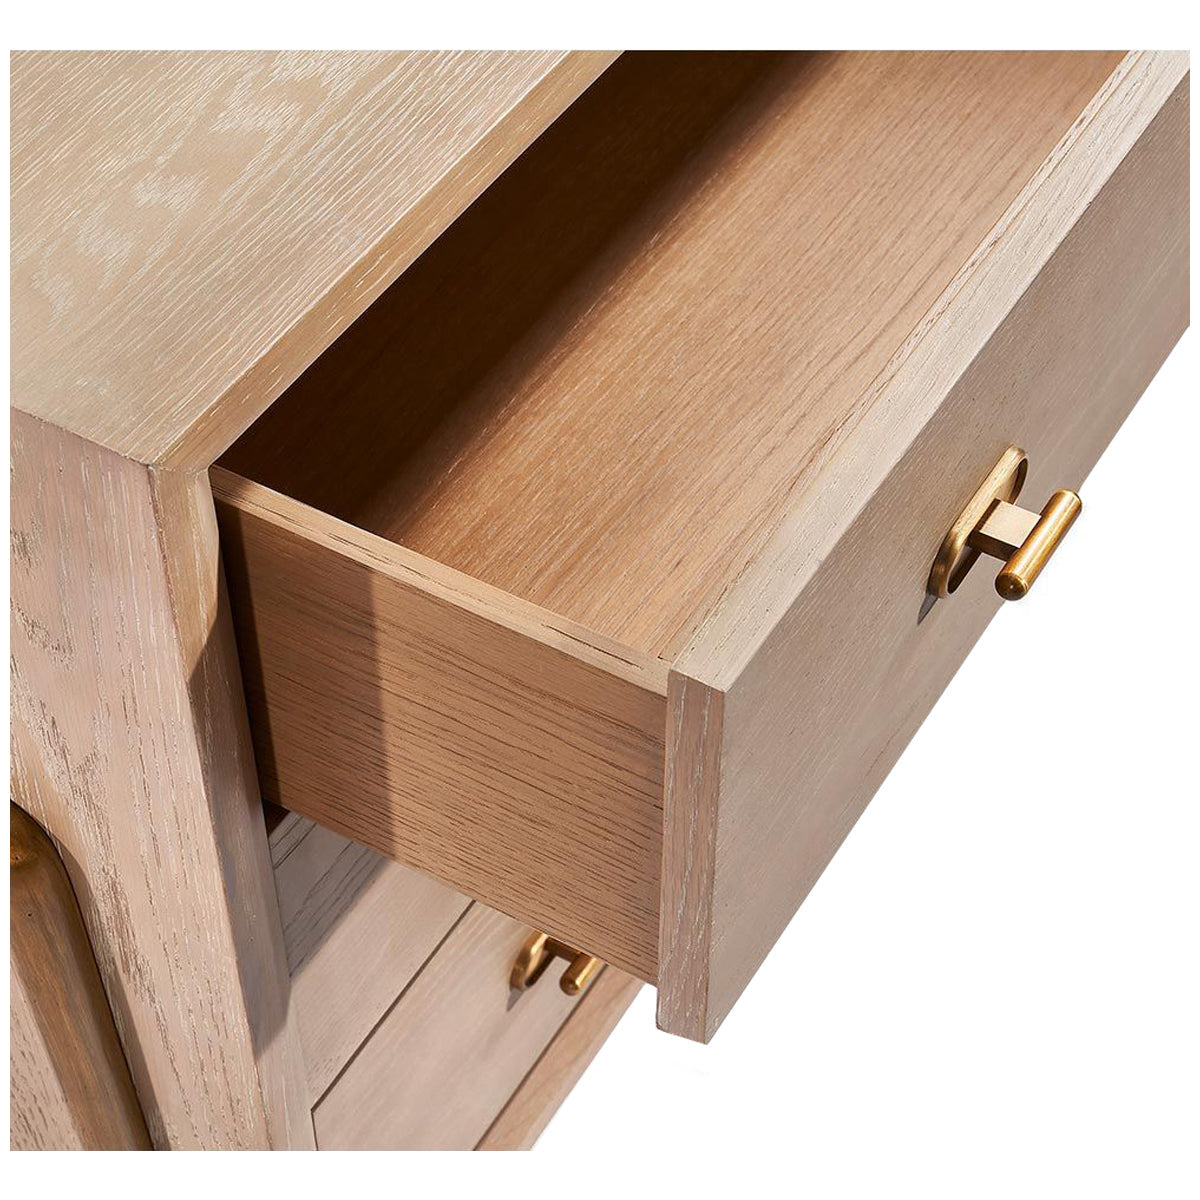 Interlude Home Creed 6-Drawer Chest